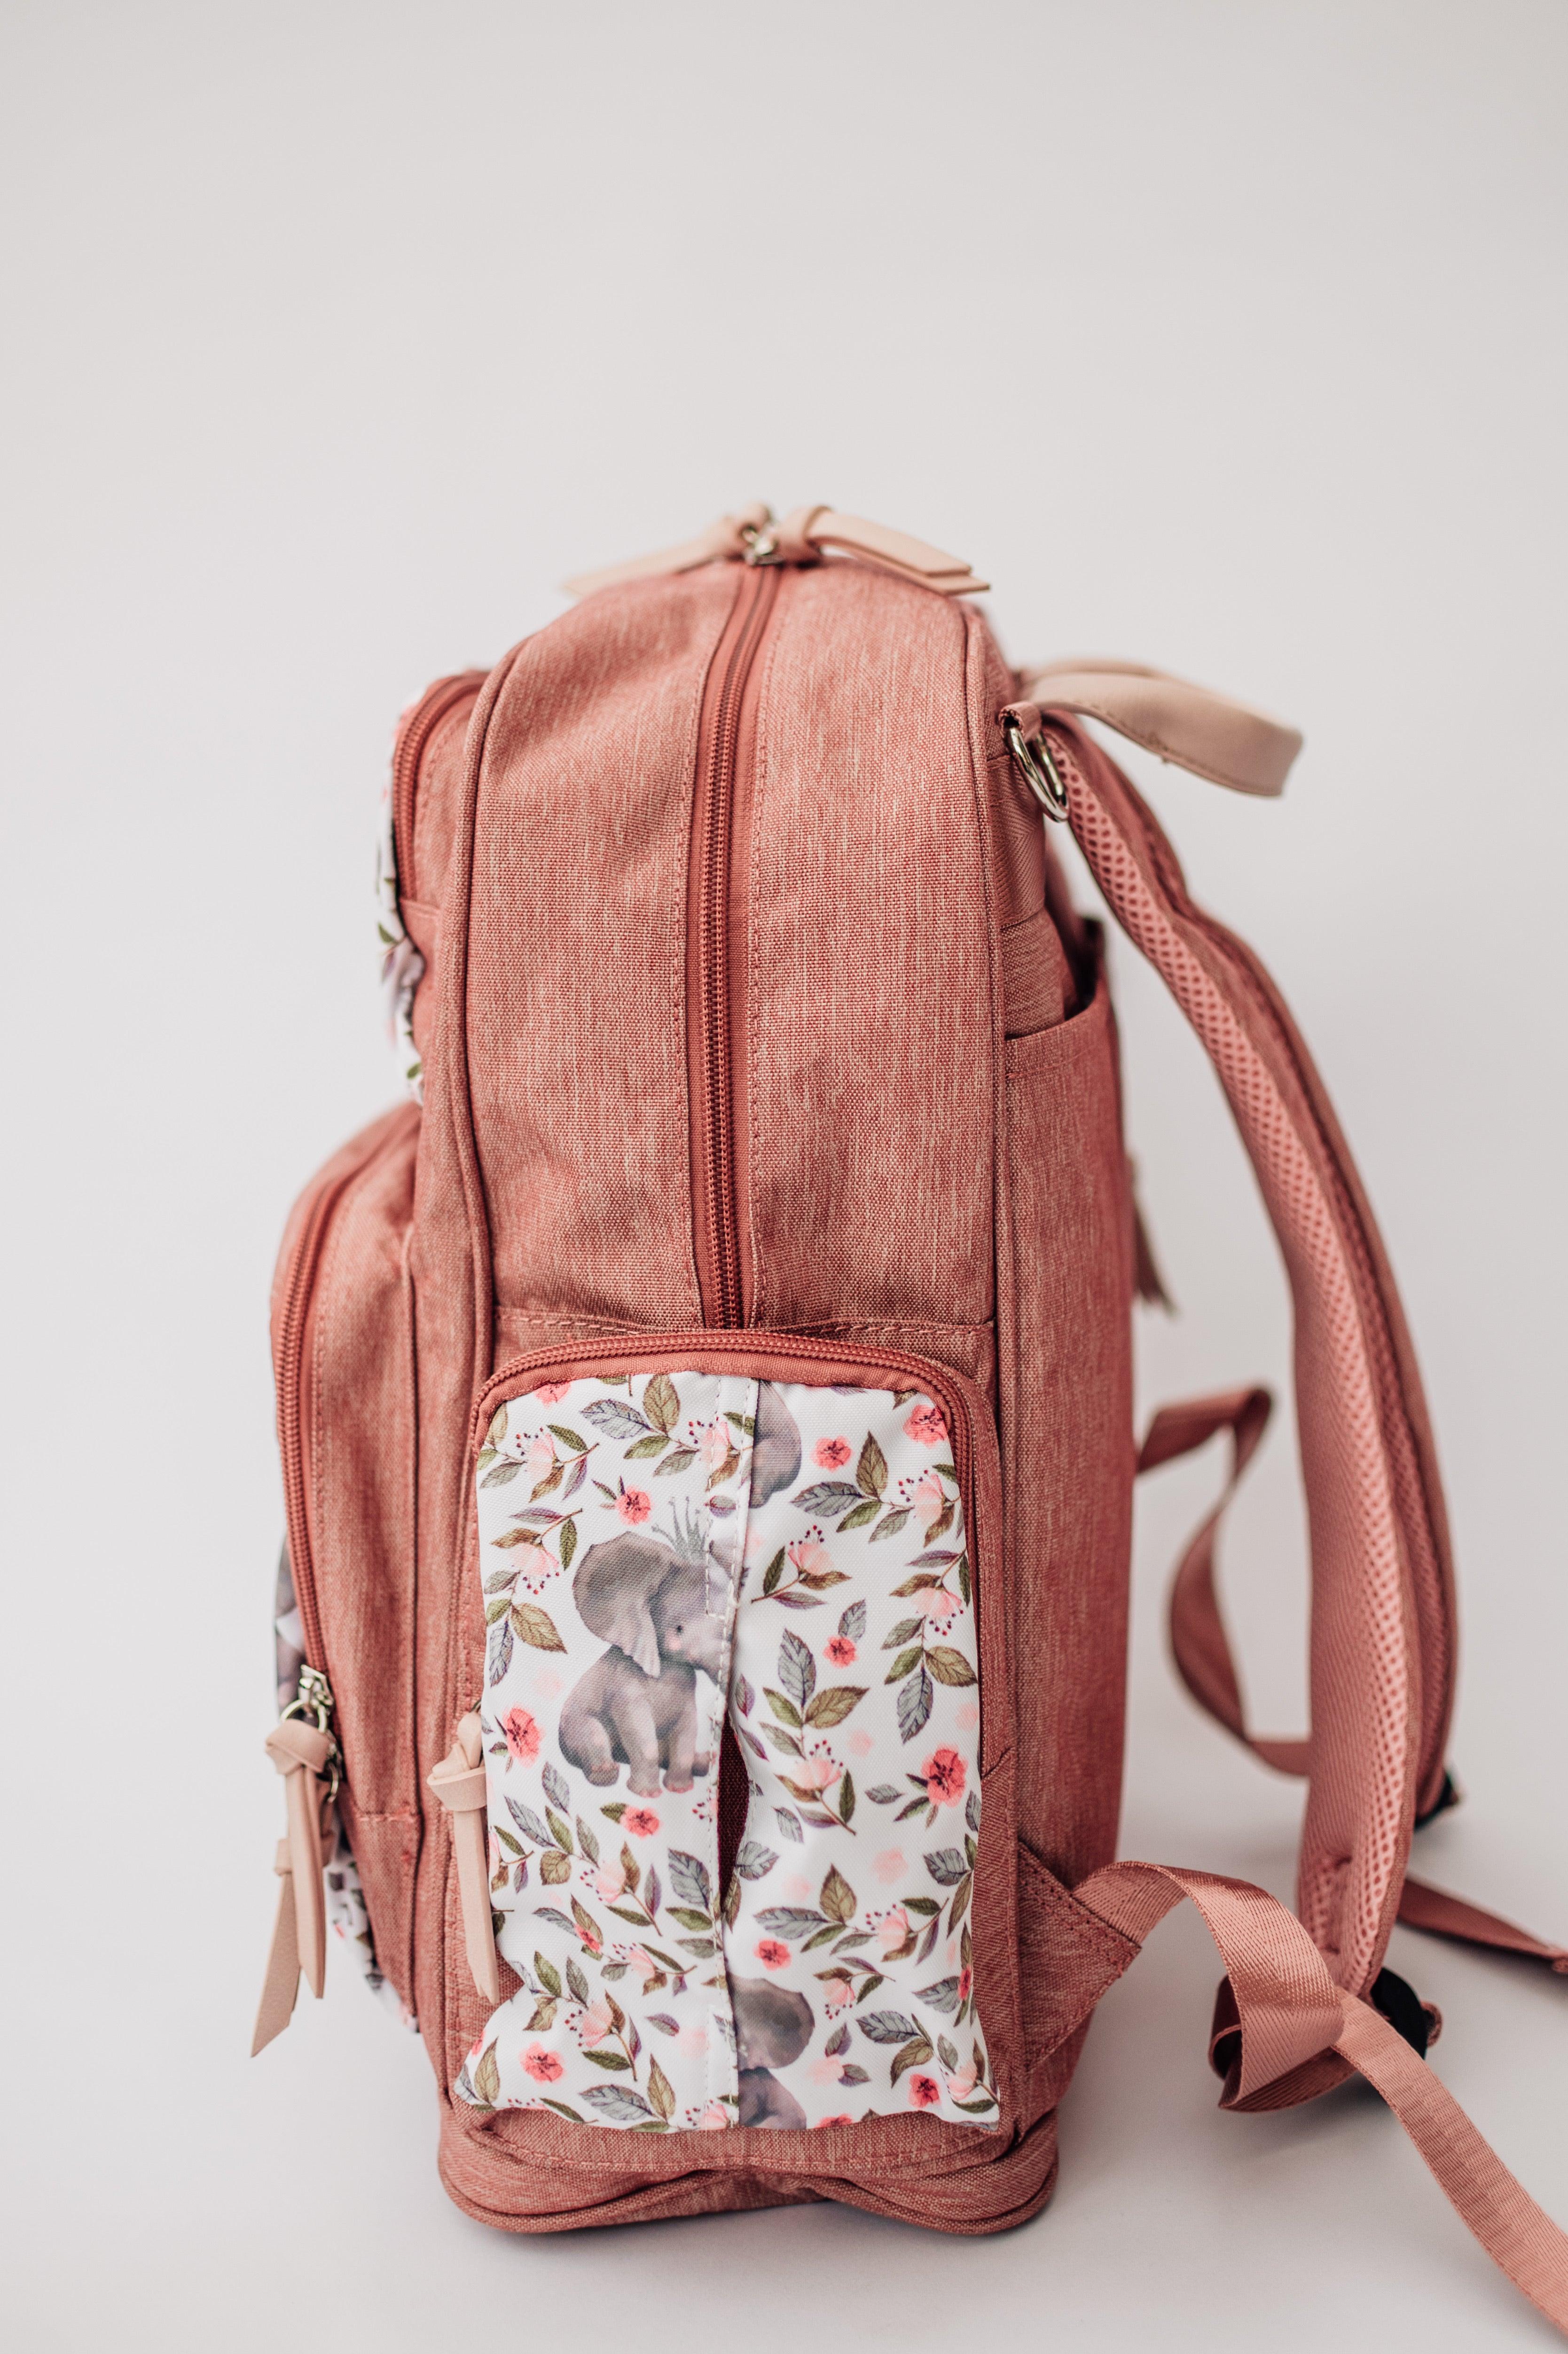 files/floral-elephant-changing-bag-claybearofficial-6.jpg